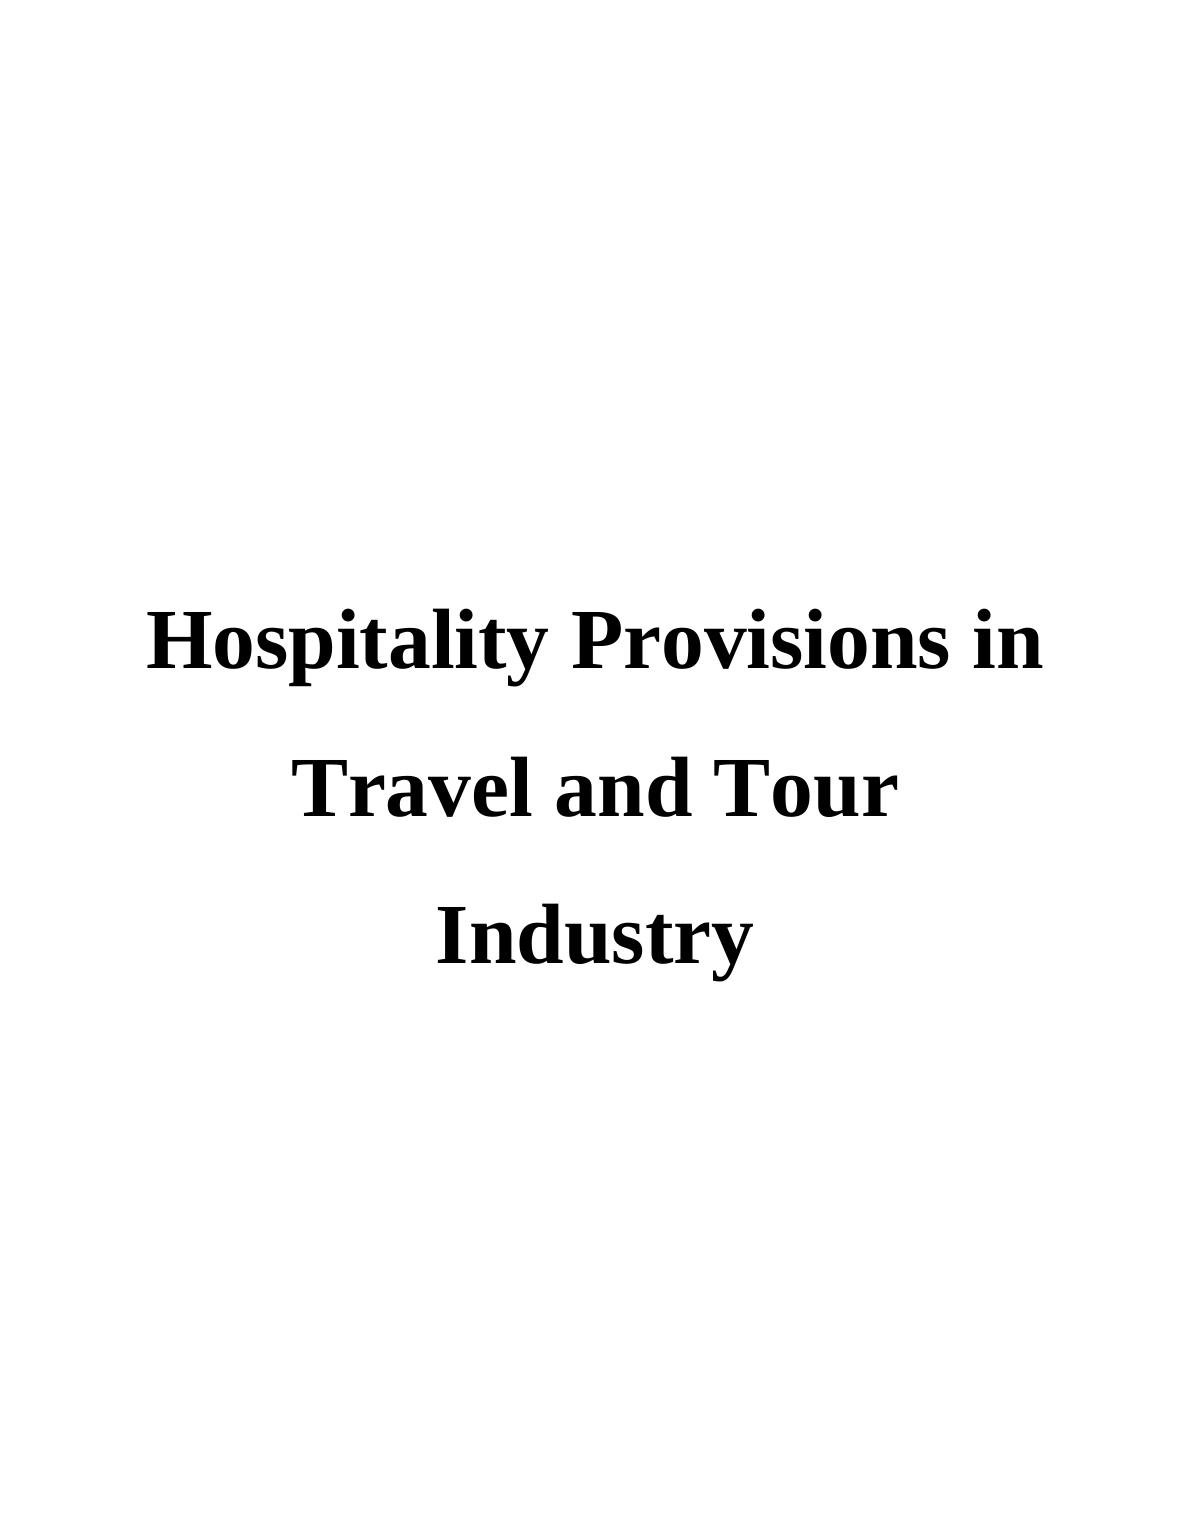 Aspects of Hospitality Provisions in Travel and Tourism_1